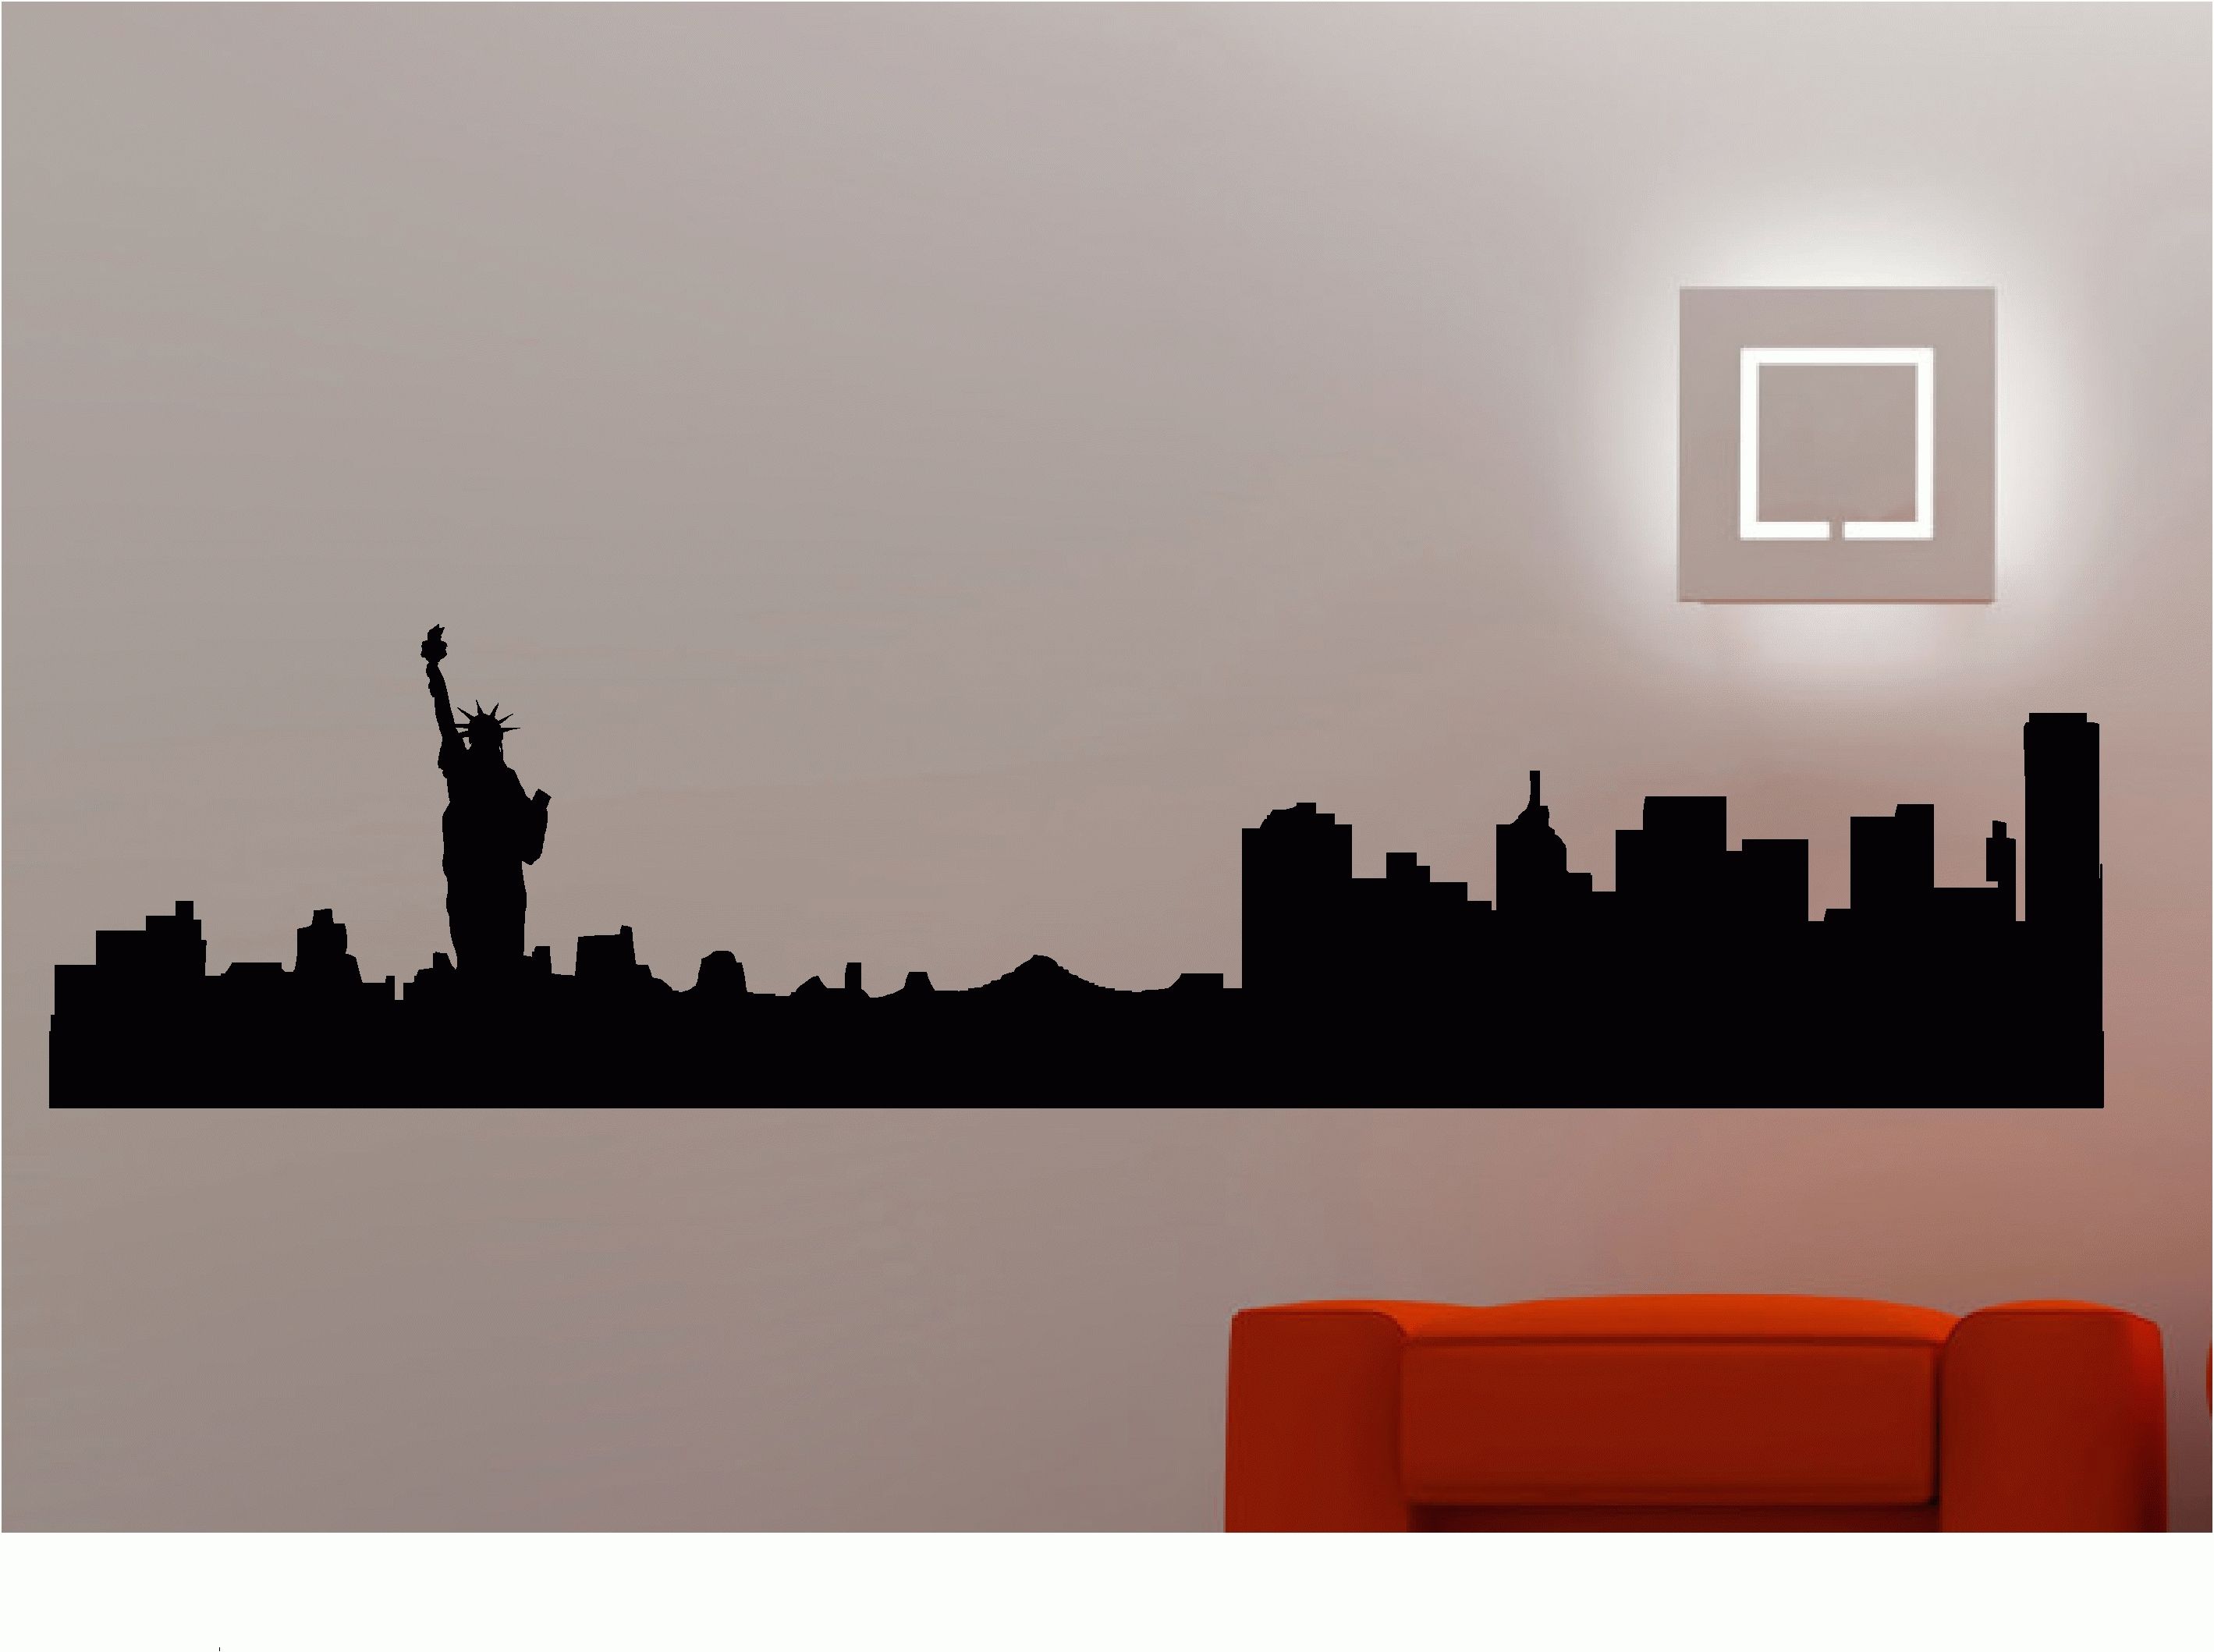 New York City Wall Art Inside Famous New York City Skyline Wall Stickers / Wall Decals Vinyl Art Decals (View 7 of 15)